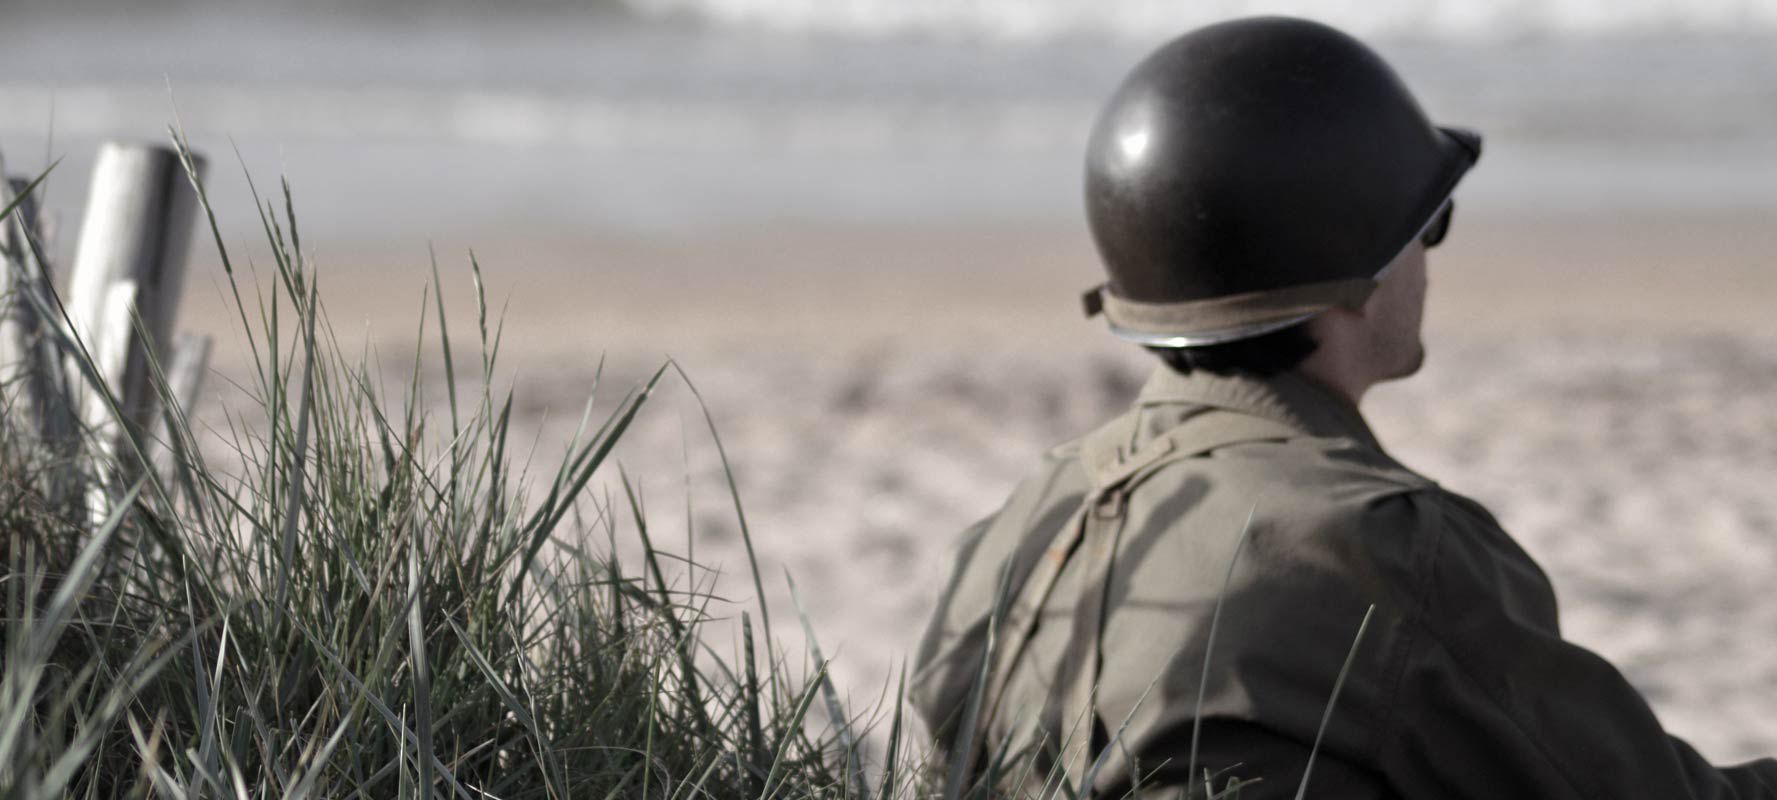 Soldier Reflecting On Beach